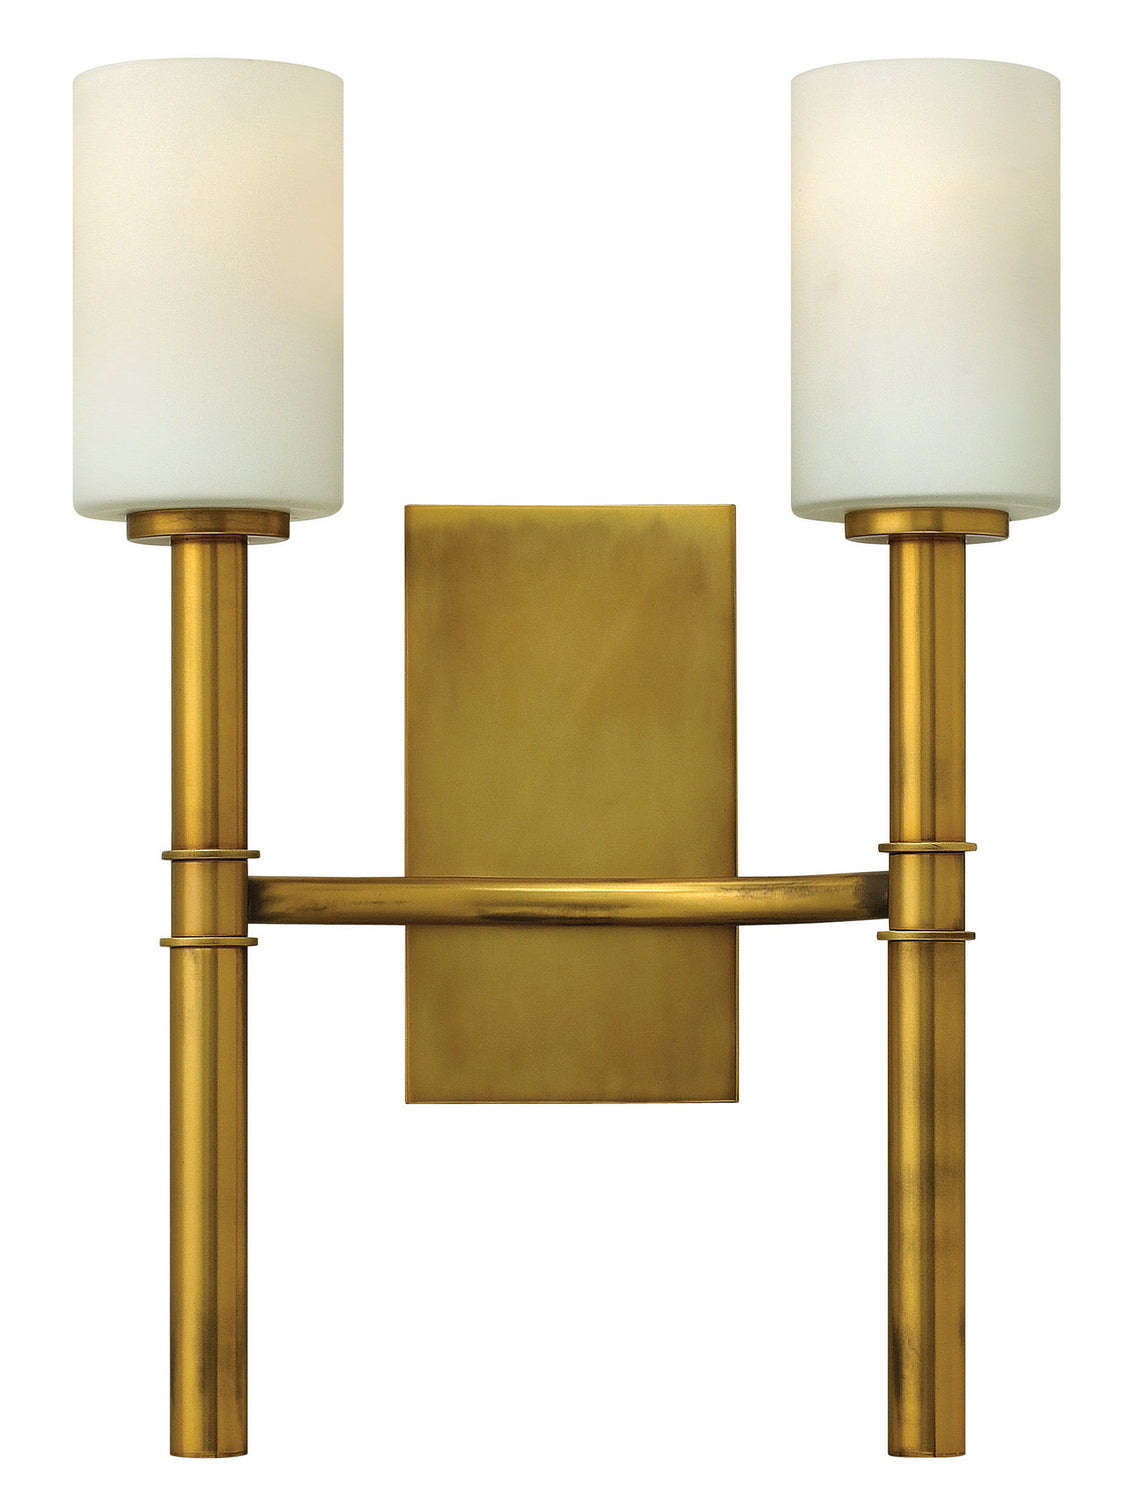 Hinkley Canada - LED Wall Sconce - Margeaux - Vintage Brass- Union Lighting Luminaires Decor